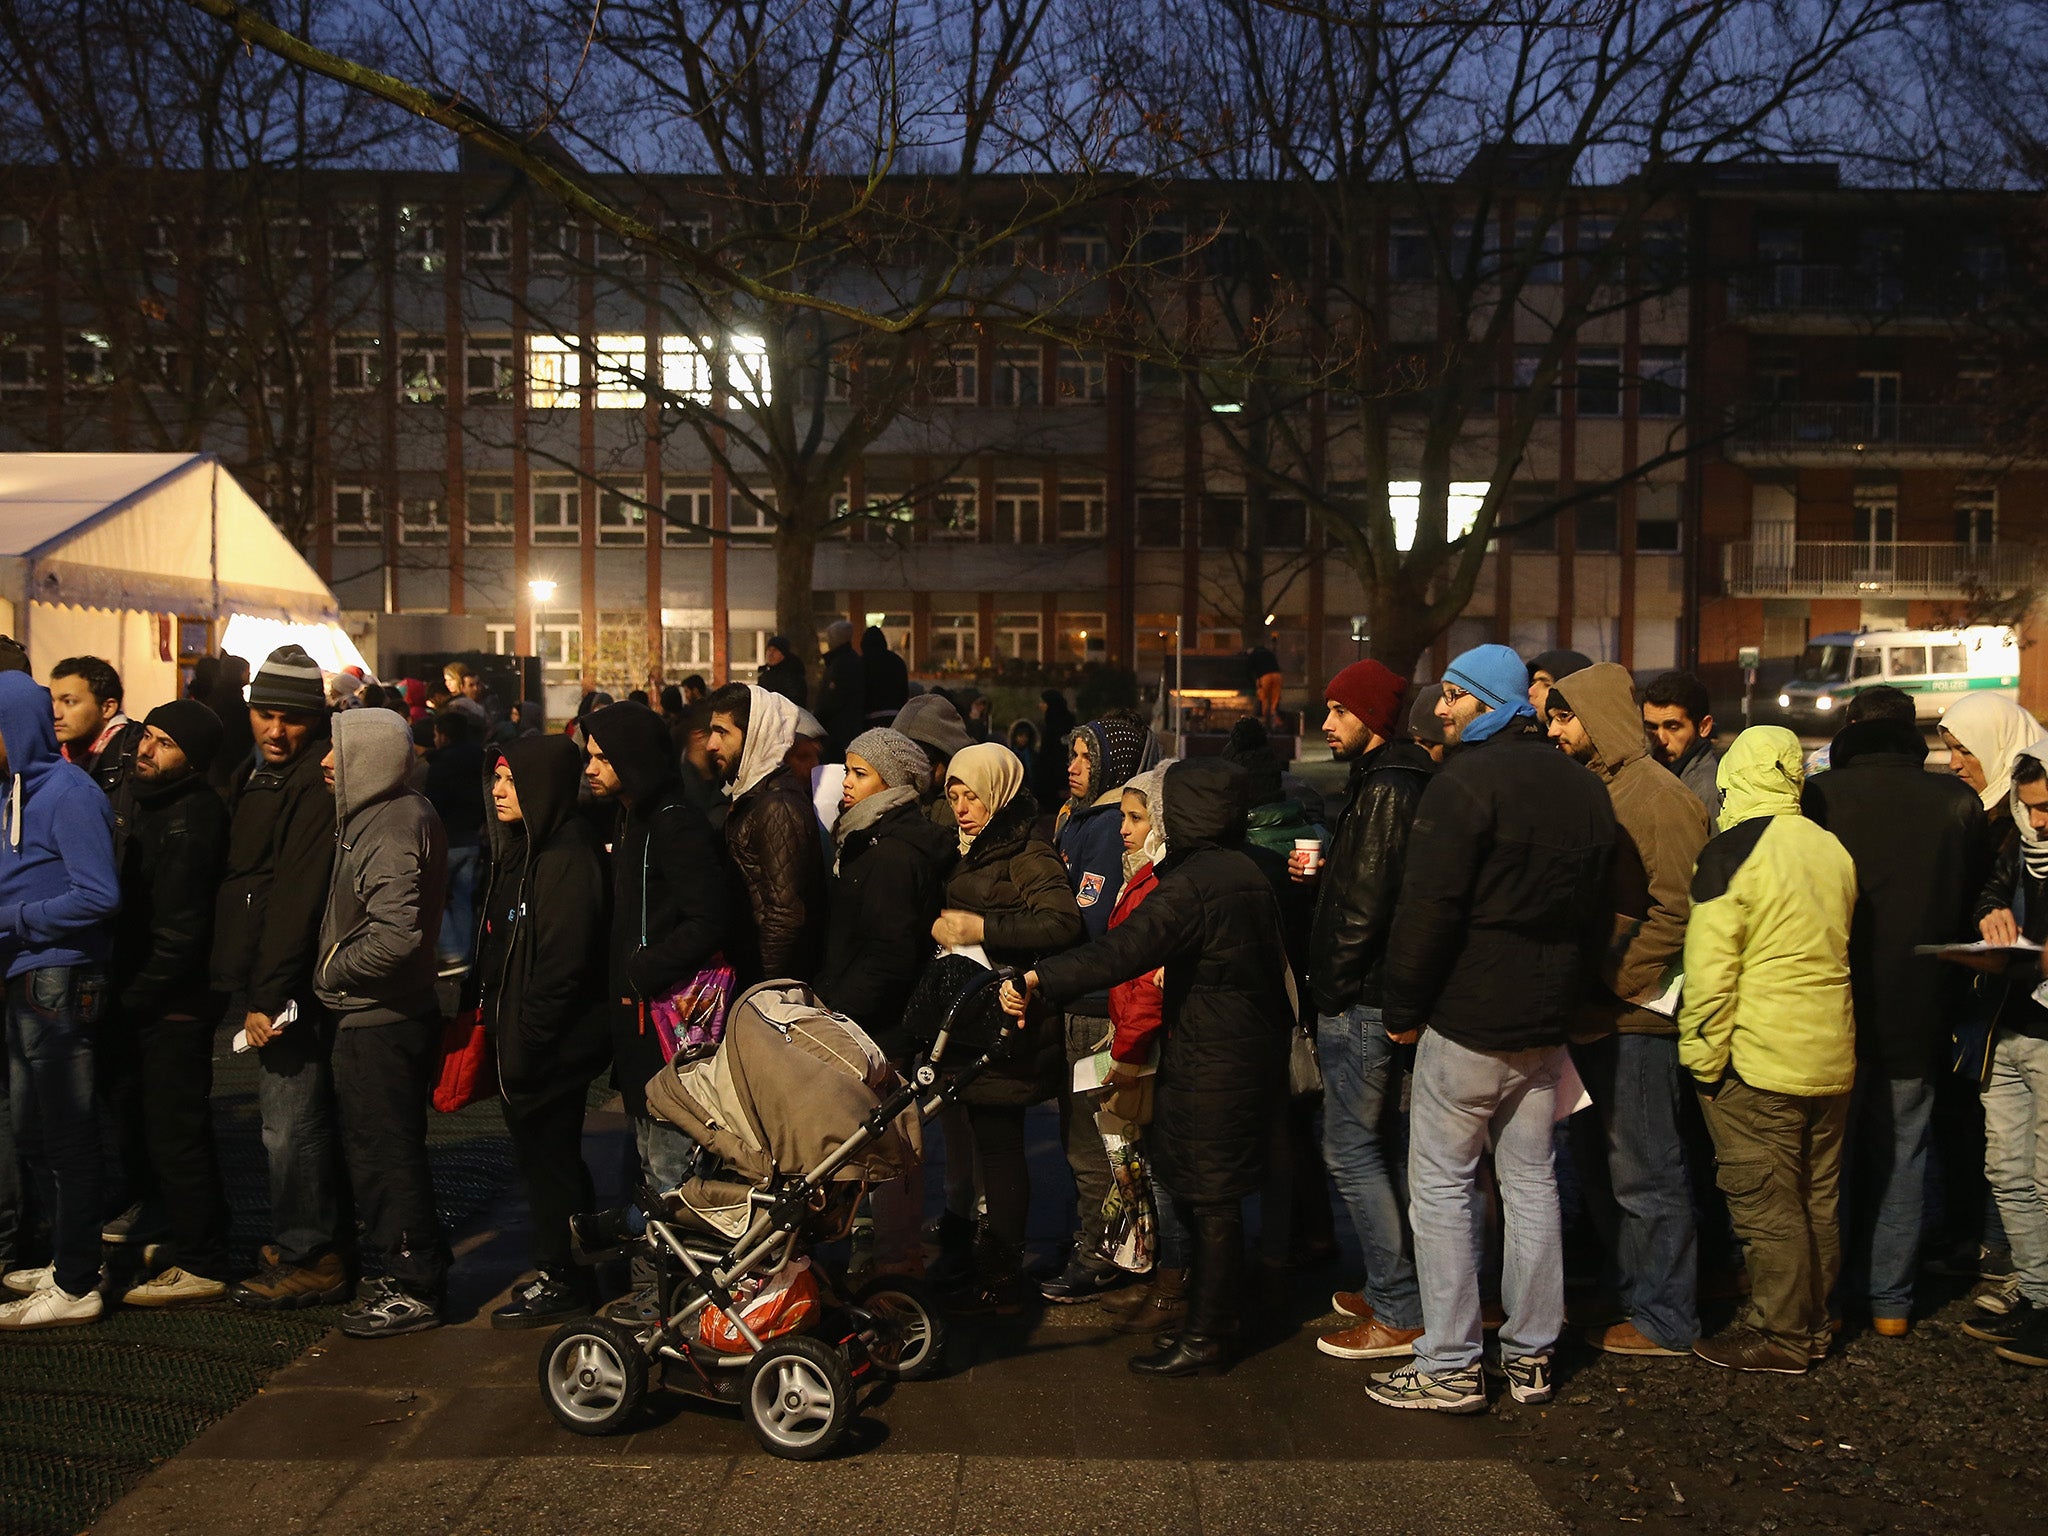 Germany received more than 476,000 asylum applications in 2015